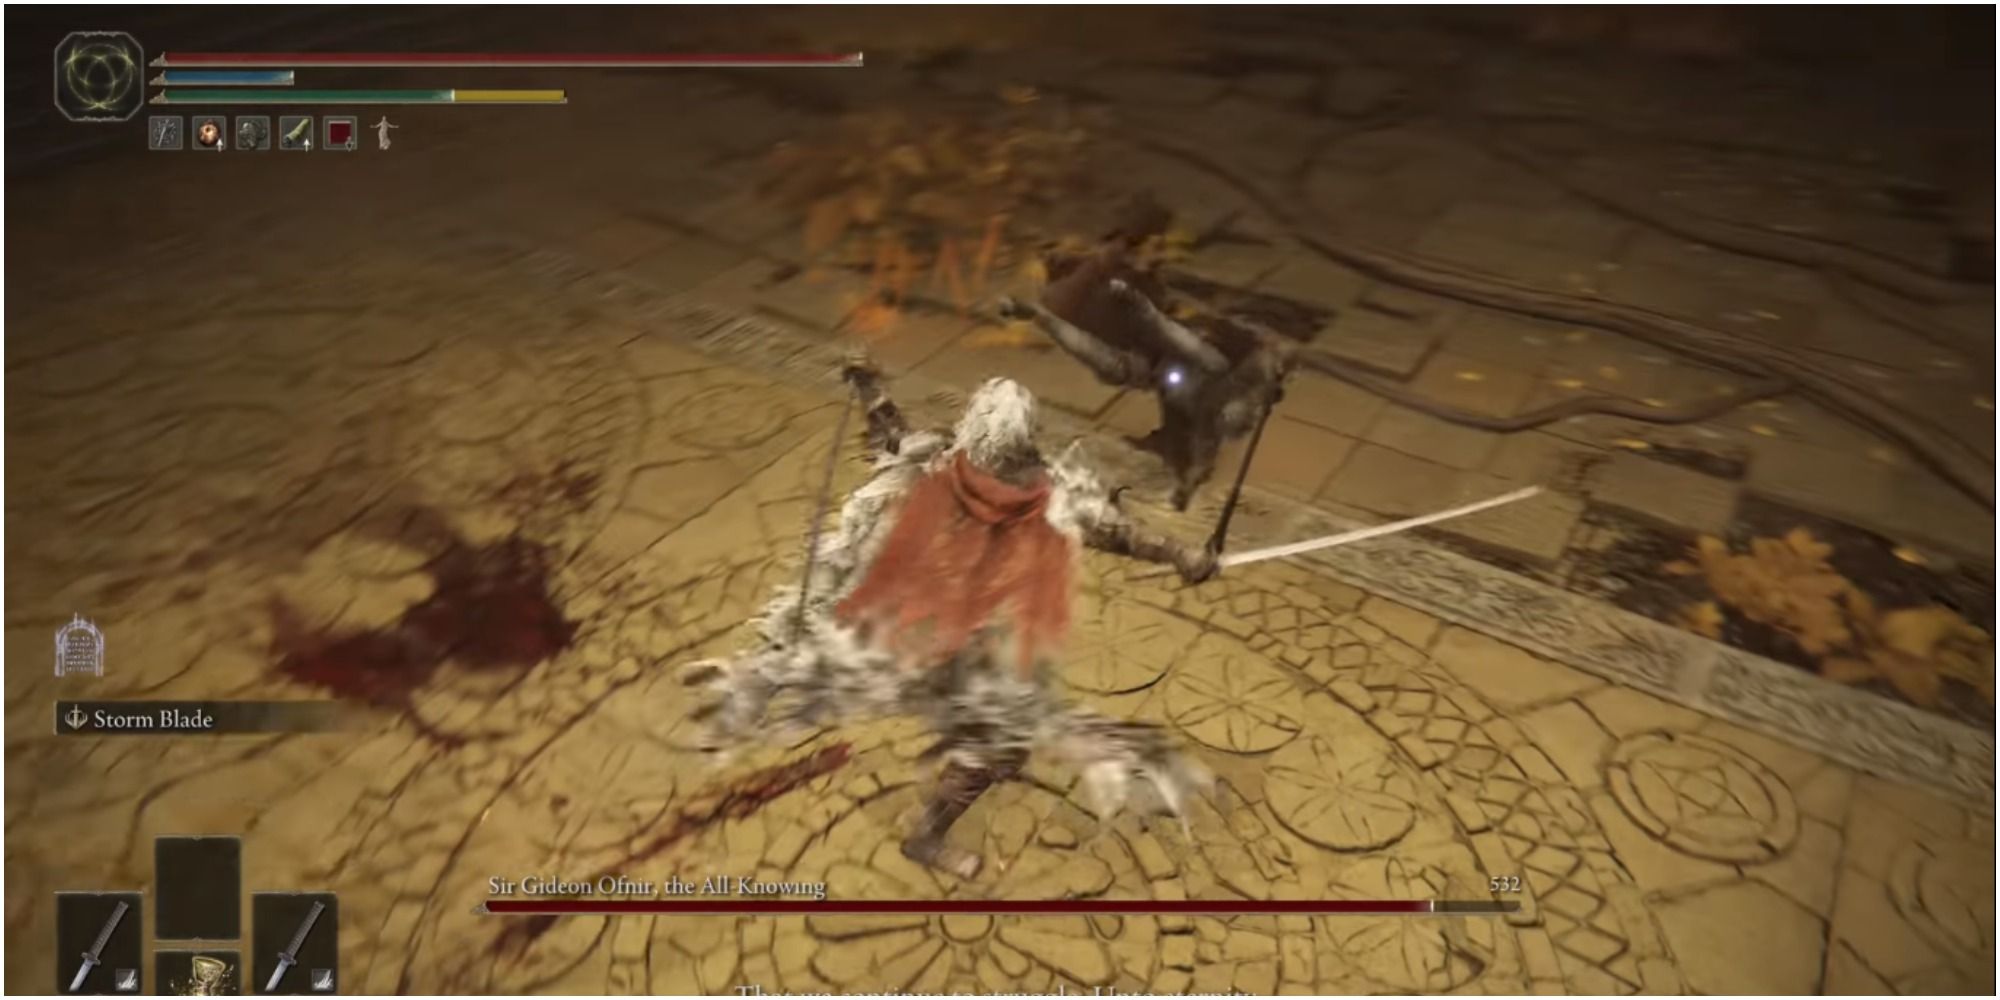 The player attacking the boss with melee weapon.